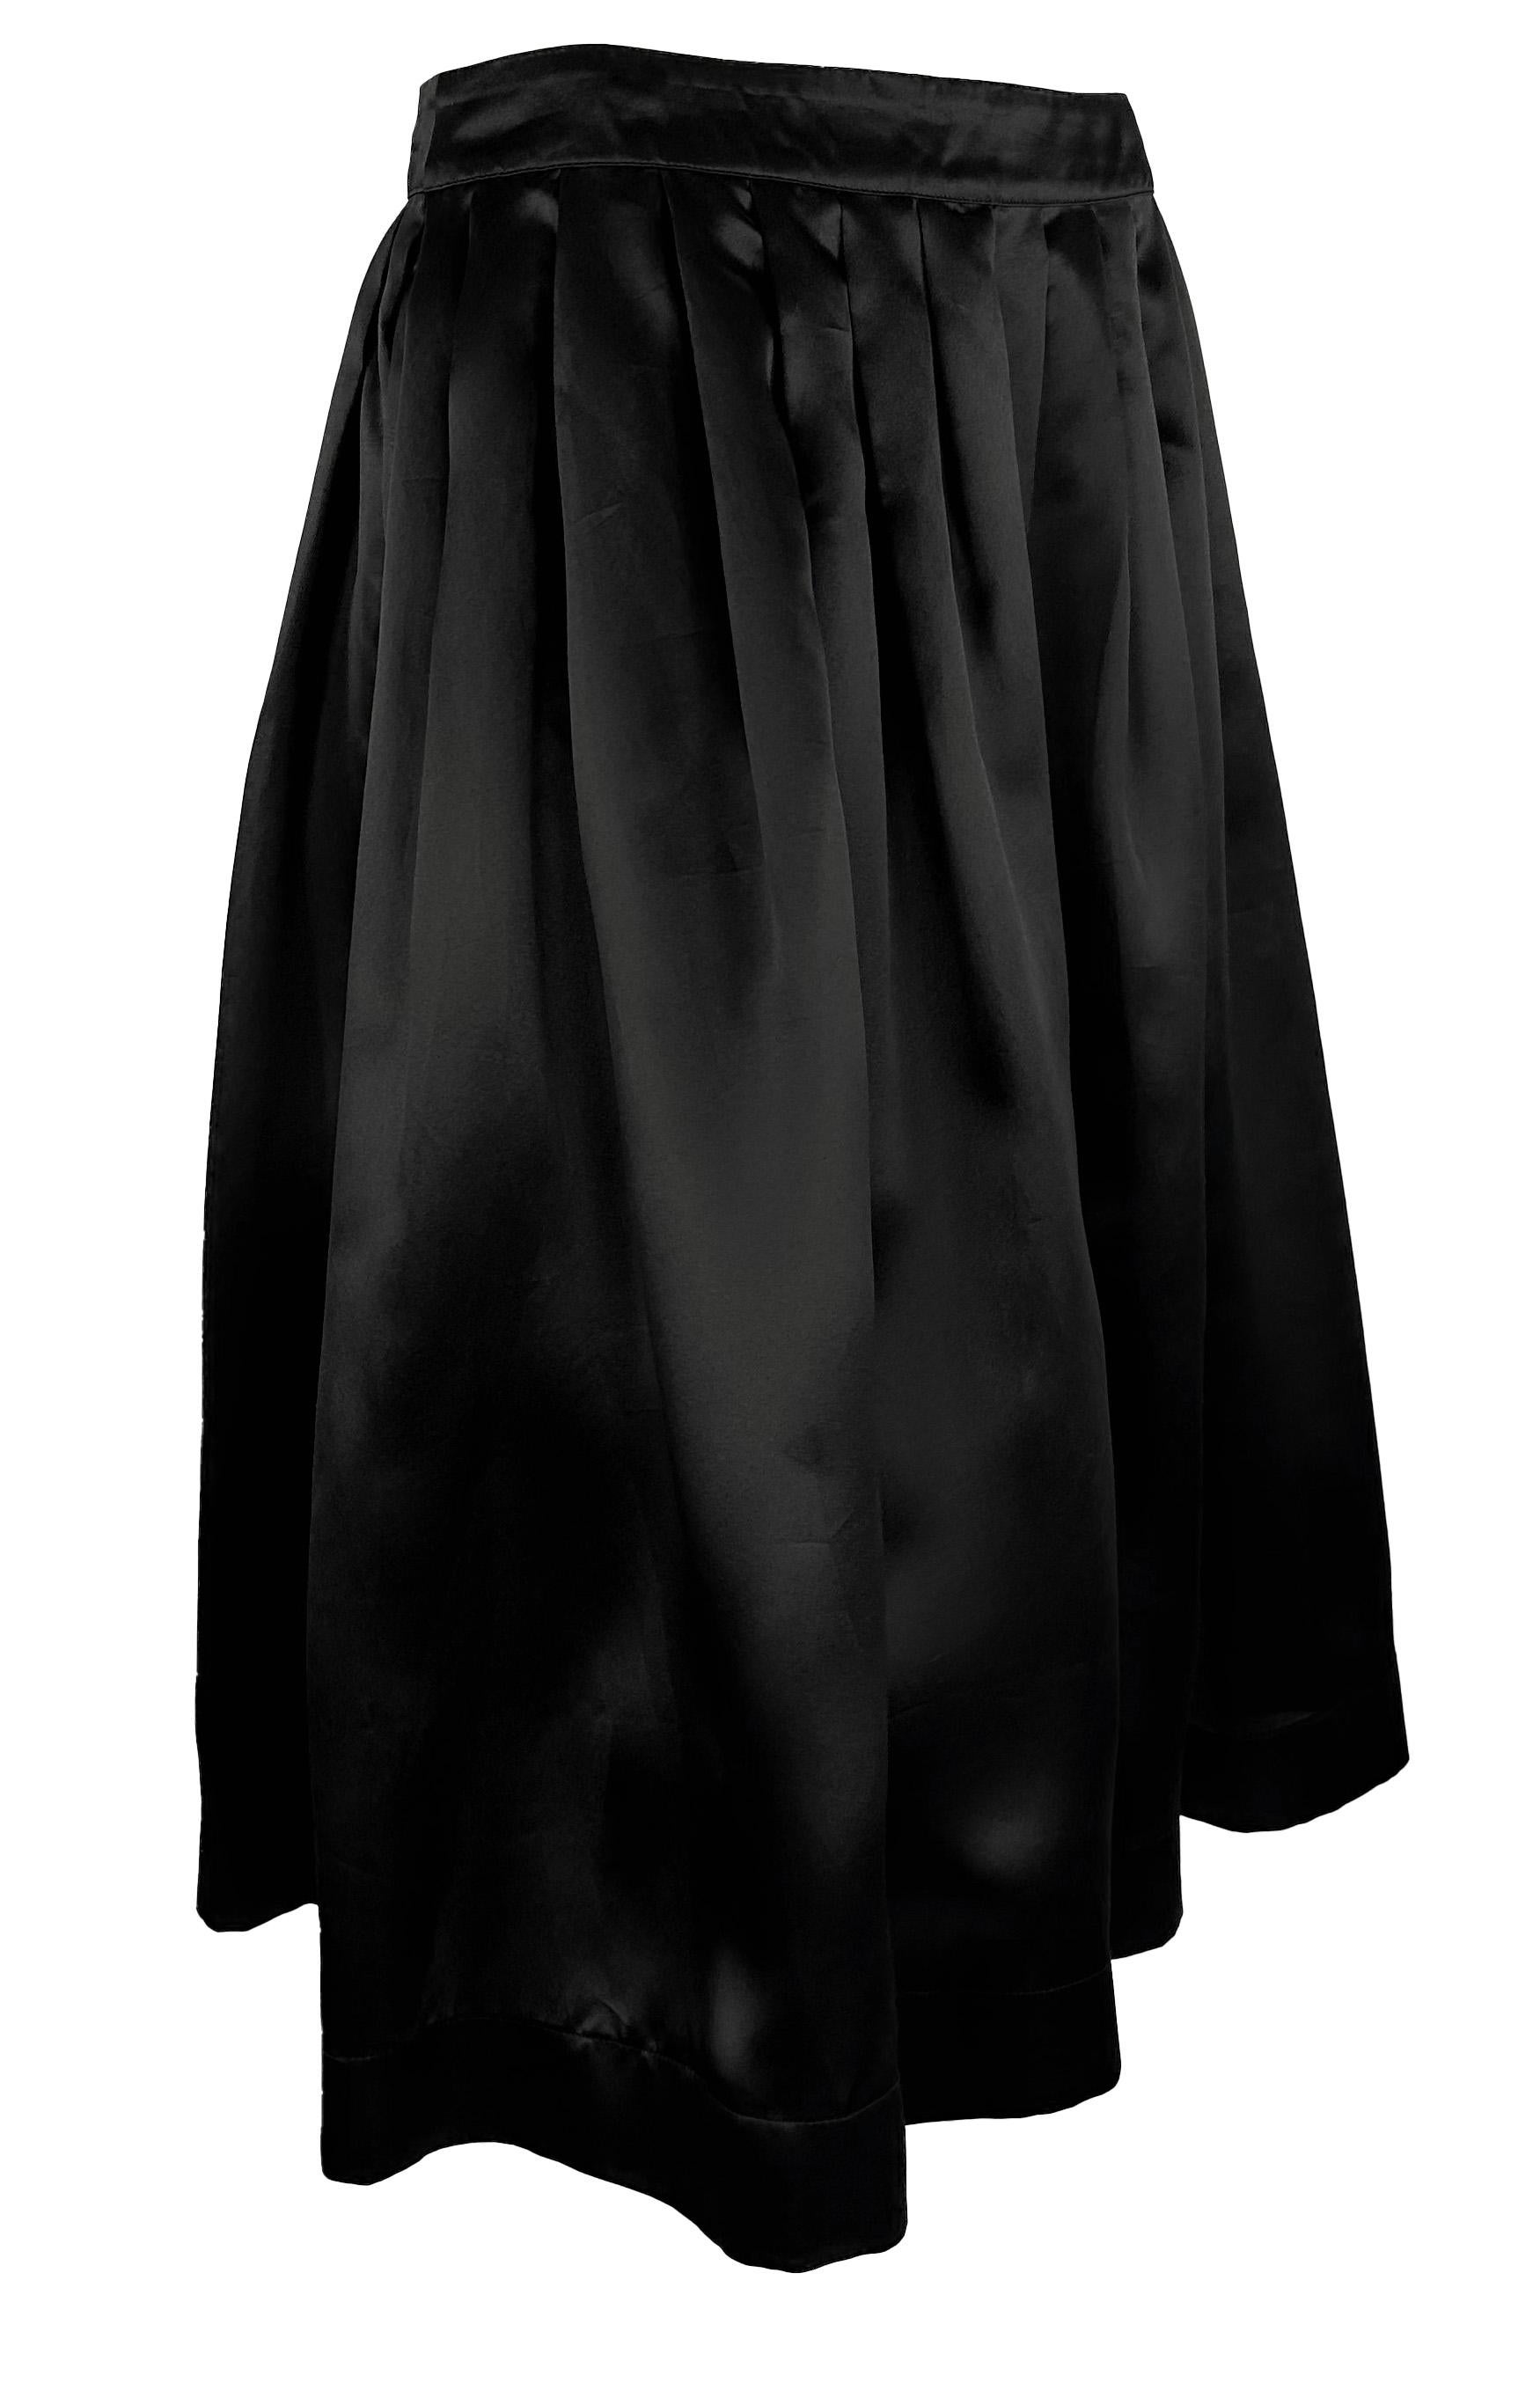 S/S 1995 Gucci by Tom Ford Runway Black Silk Satin Pleated Flare Skirt For Sale 3